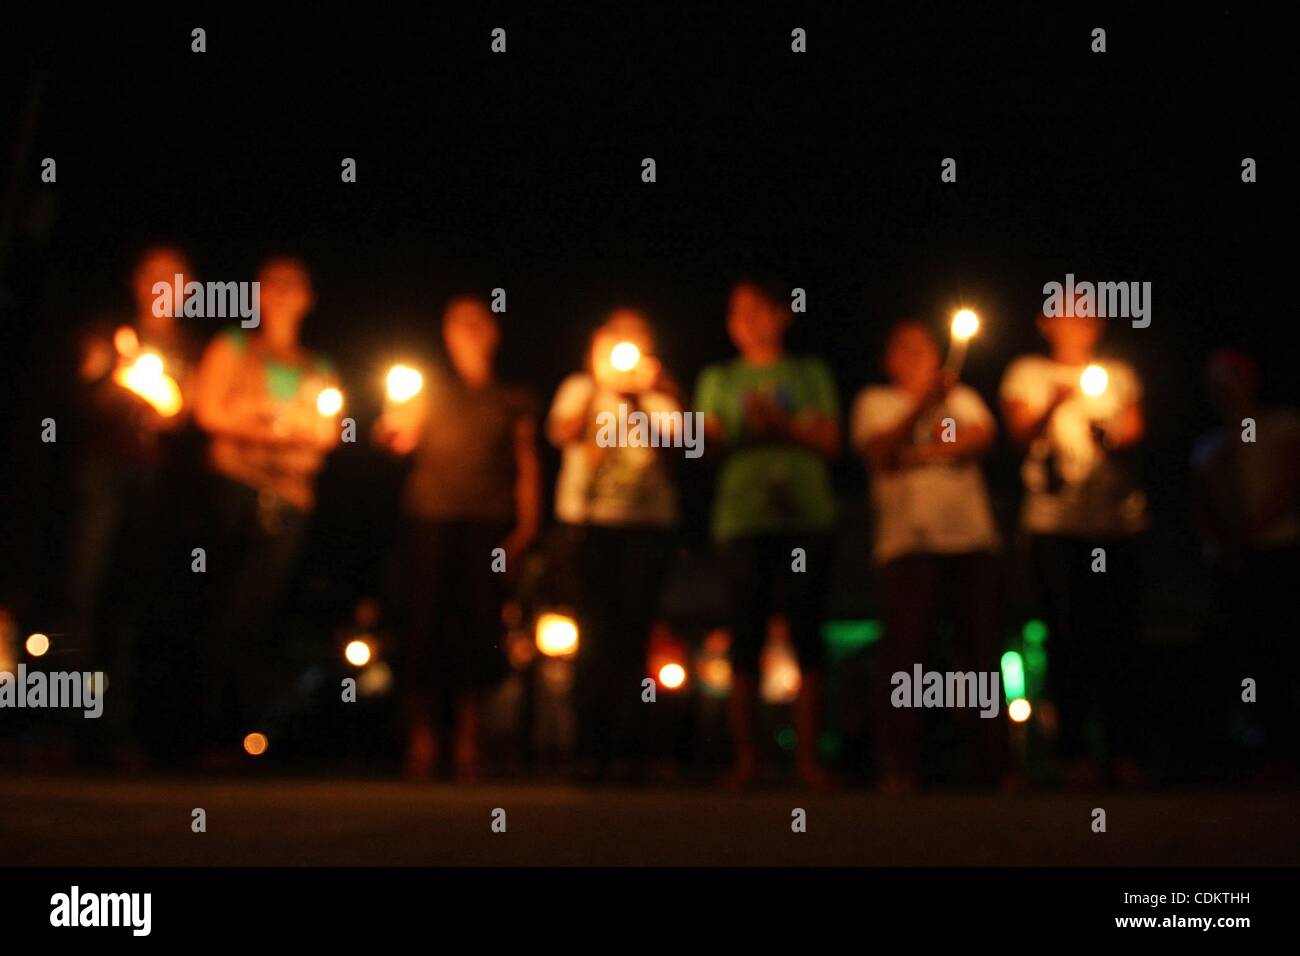 Mar 26, 2011 - Koronadal, Philippines - Environmentalists in the southern Philippine city of Koronadal on Mindanao island light candles on the streets as they join the World in turning off lights for one hour for Earth Hour on Saturday night. Earth hour, a global initiative powered by World wildlife Stock Photo